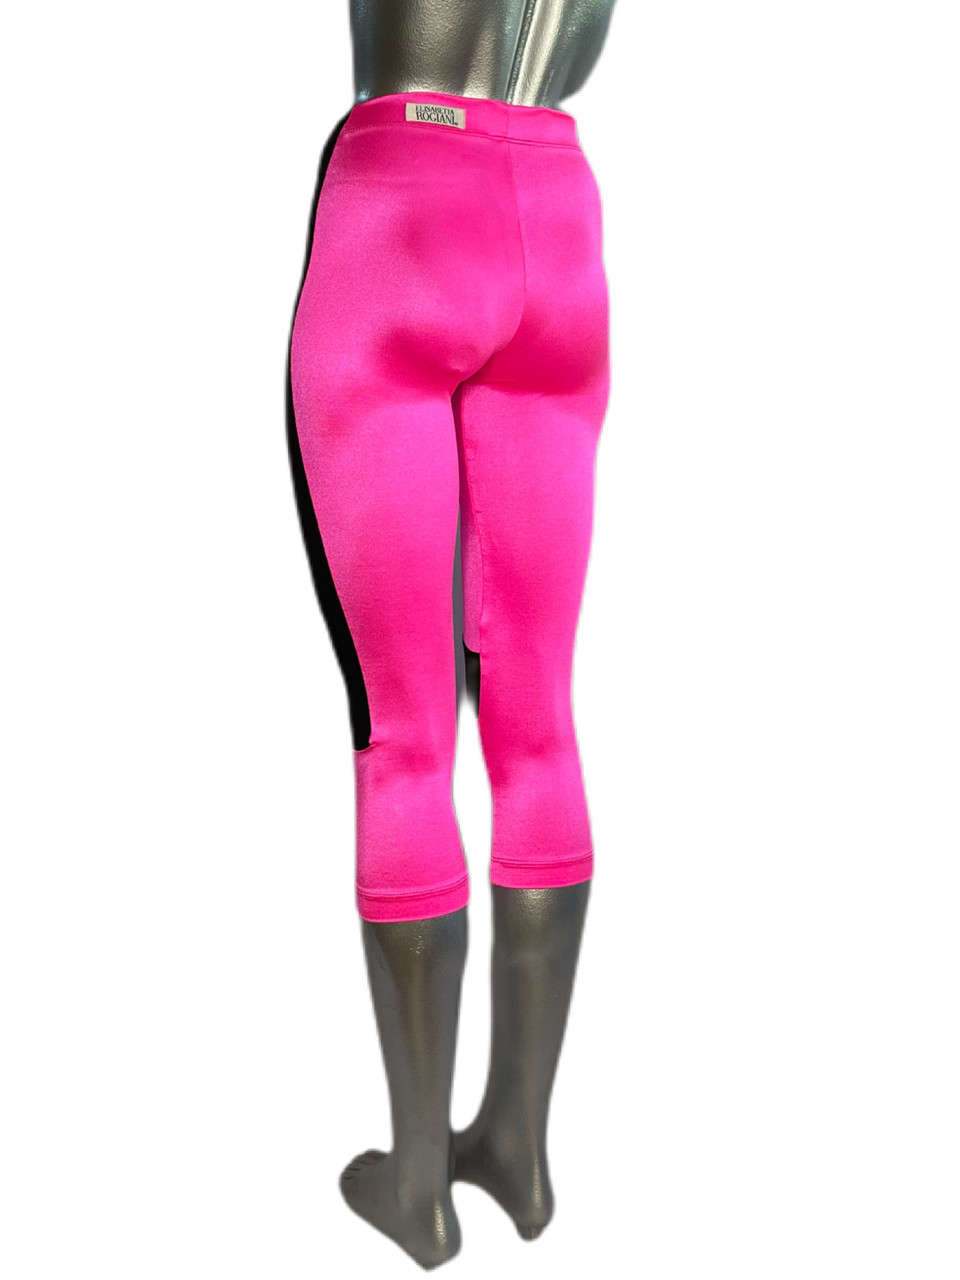 Adult Leggings mens Letter Sized: Hot Pink/bright Pink Fuchsia With Neon  Lime/lemon Snakeskin Print. Ankle Length. -  Canada